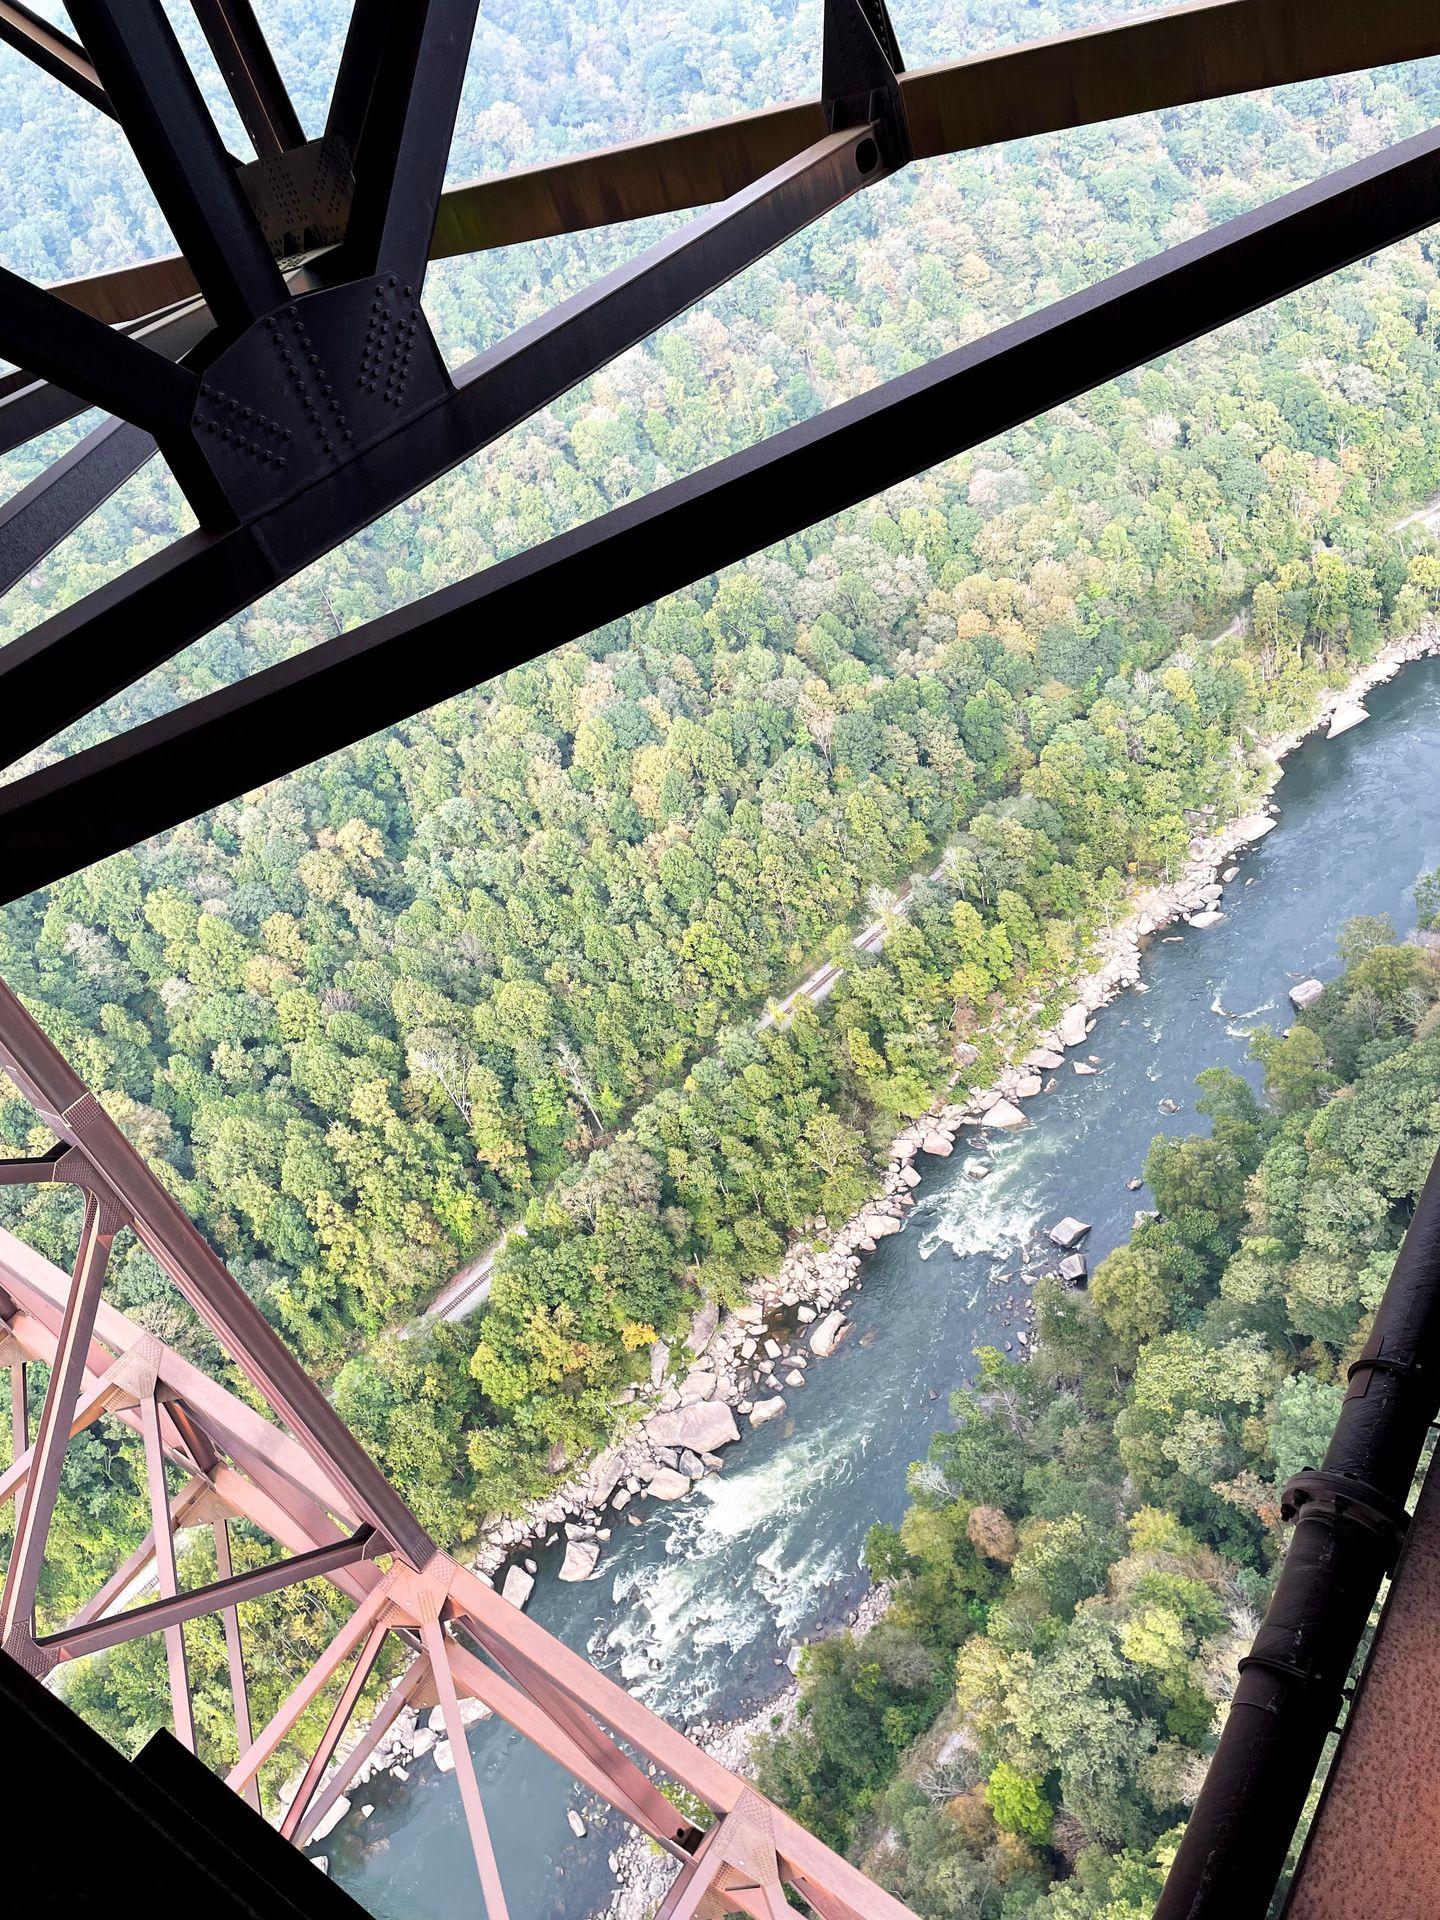 The New River from the New River Gorge catwalk.